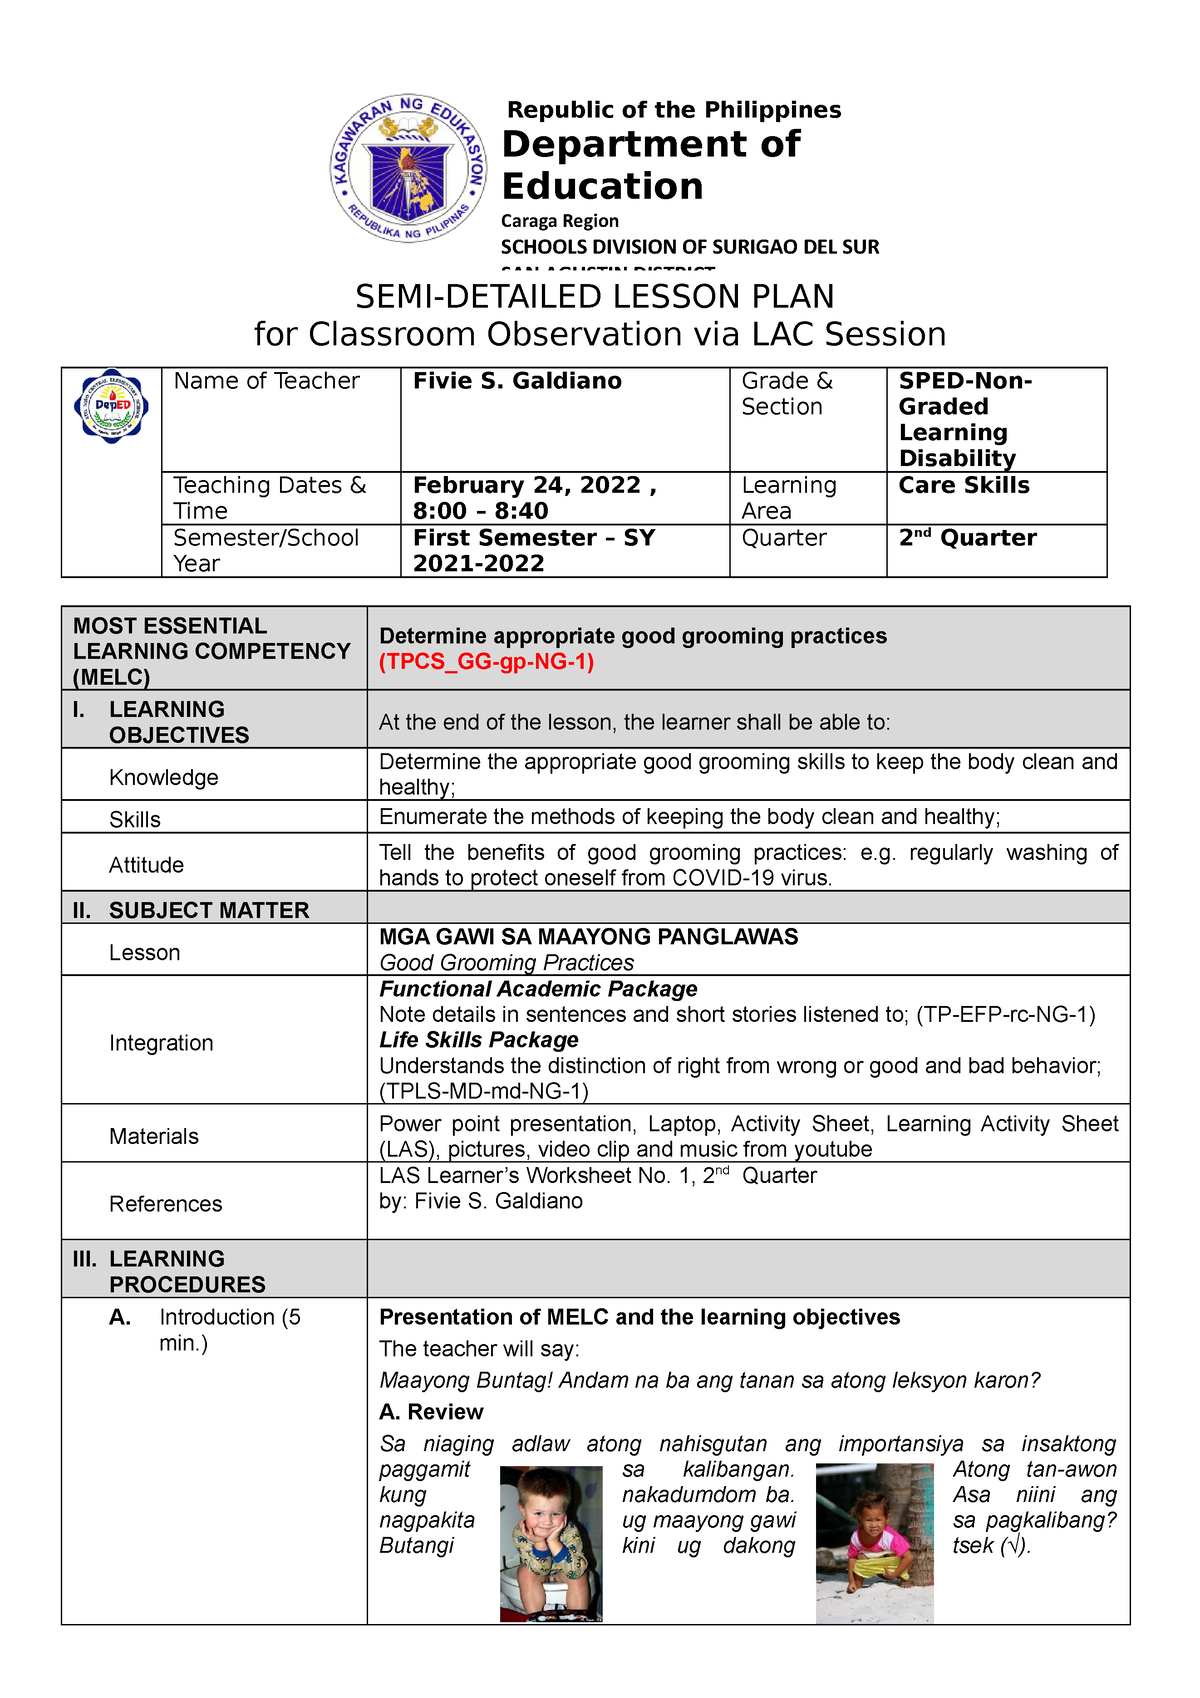 sped-lesson-plan-classroom-observation-1-semi-detailed-lesson-plan